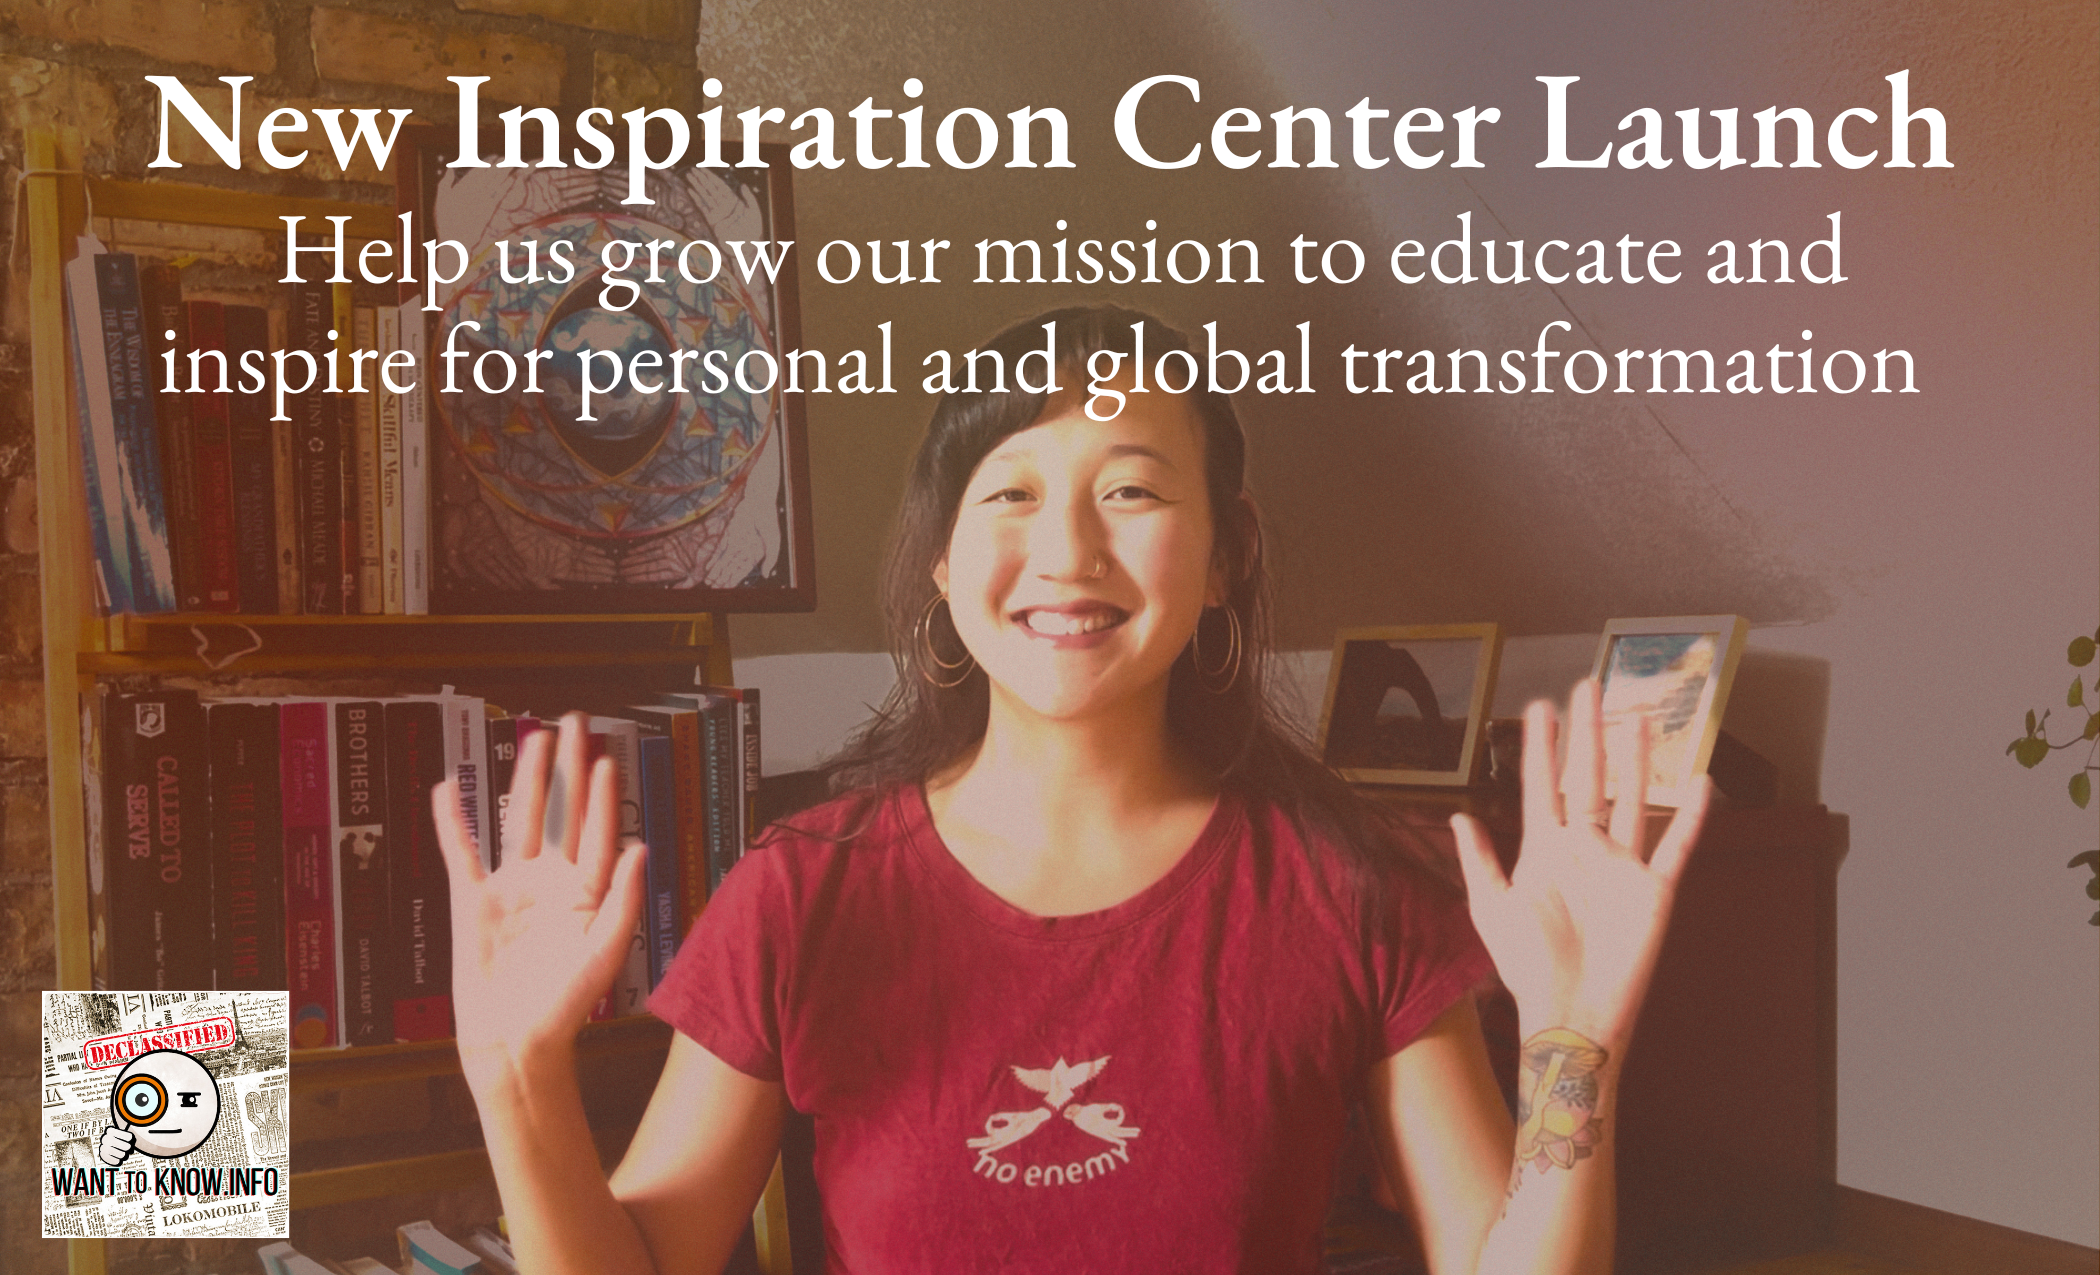 New Inspiration Center Launch: Help Us Grow Our Mission to Educate and Inspire for Personal and Global Transformation